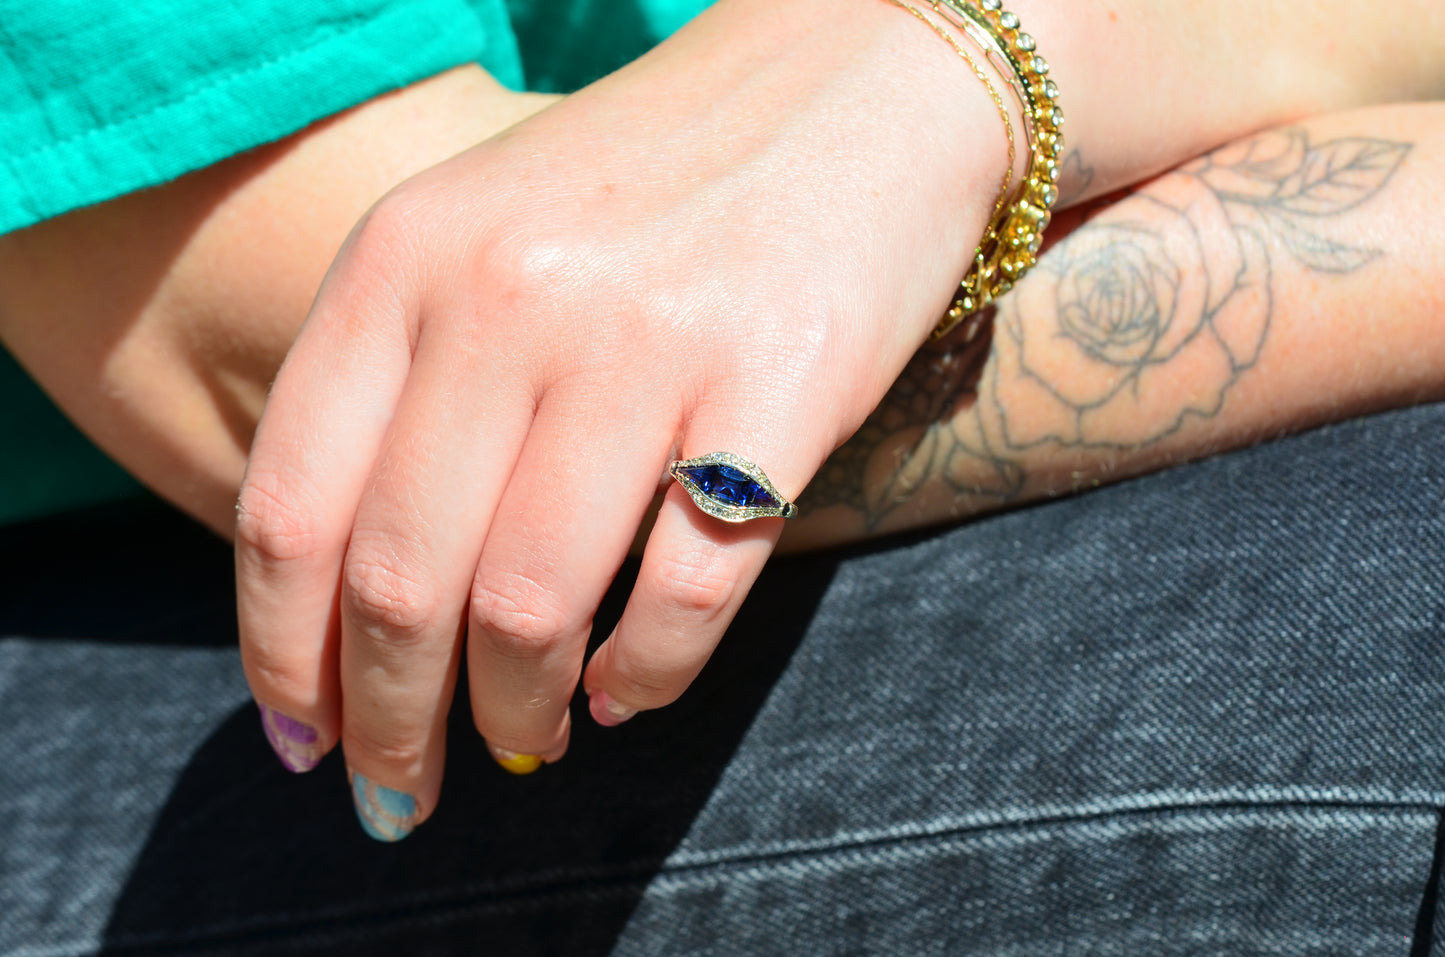 A medium-close view of the ring, vibrant in bright daylight, on the left pinky finger of a Caucasian model. The model has bright multicolored nails, a teal shirt and black jeans, and a floral tattoo visible on her arm.